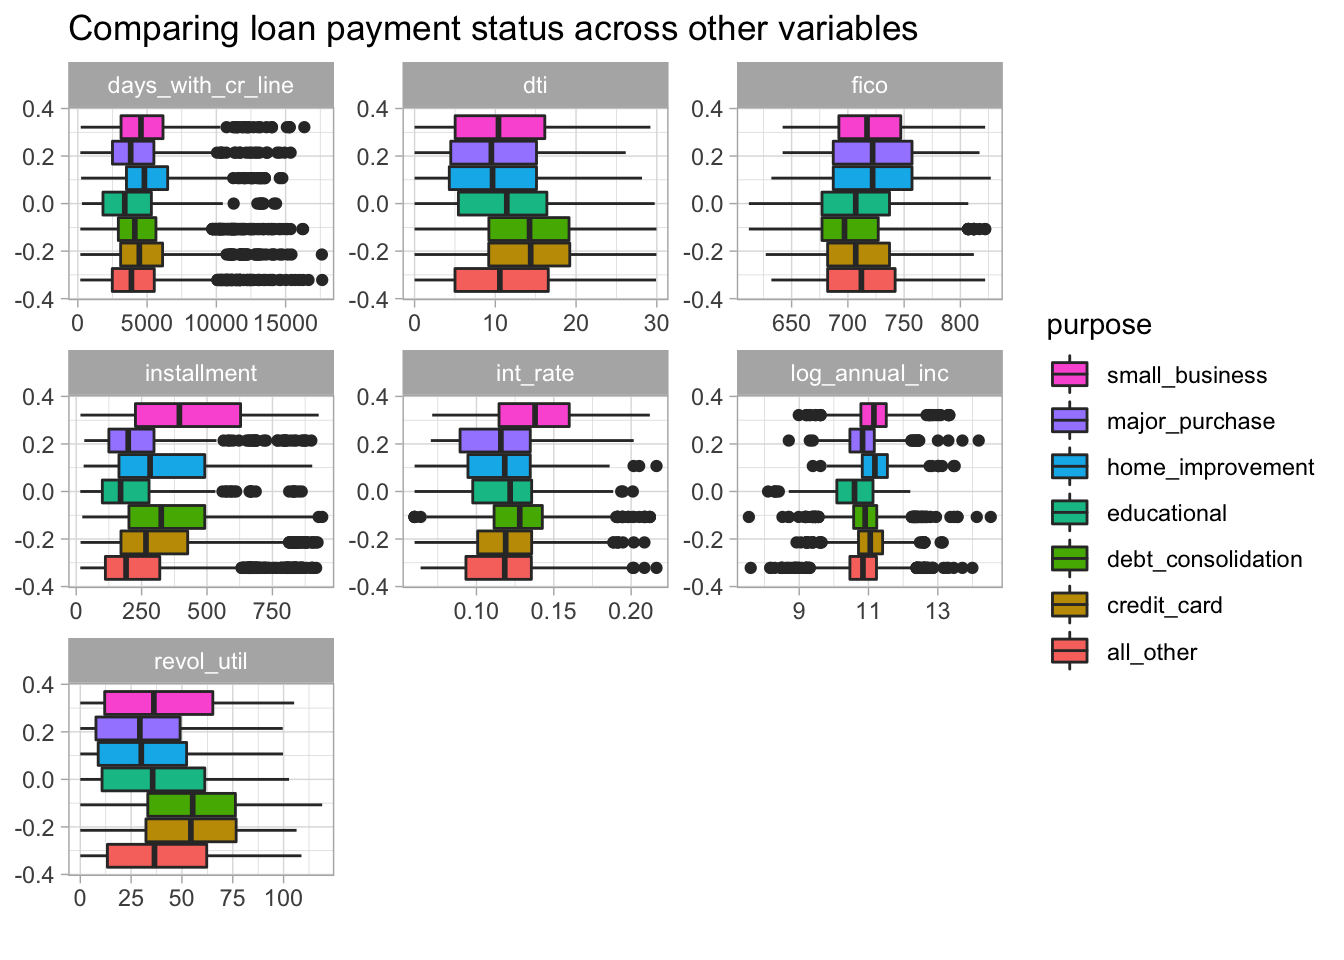 Boxplots of numeric features across loan types